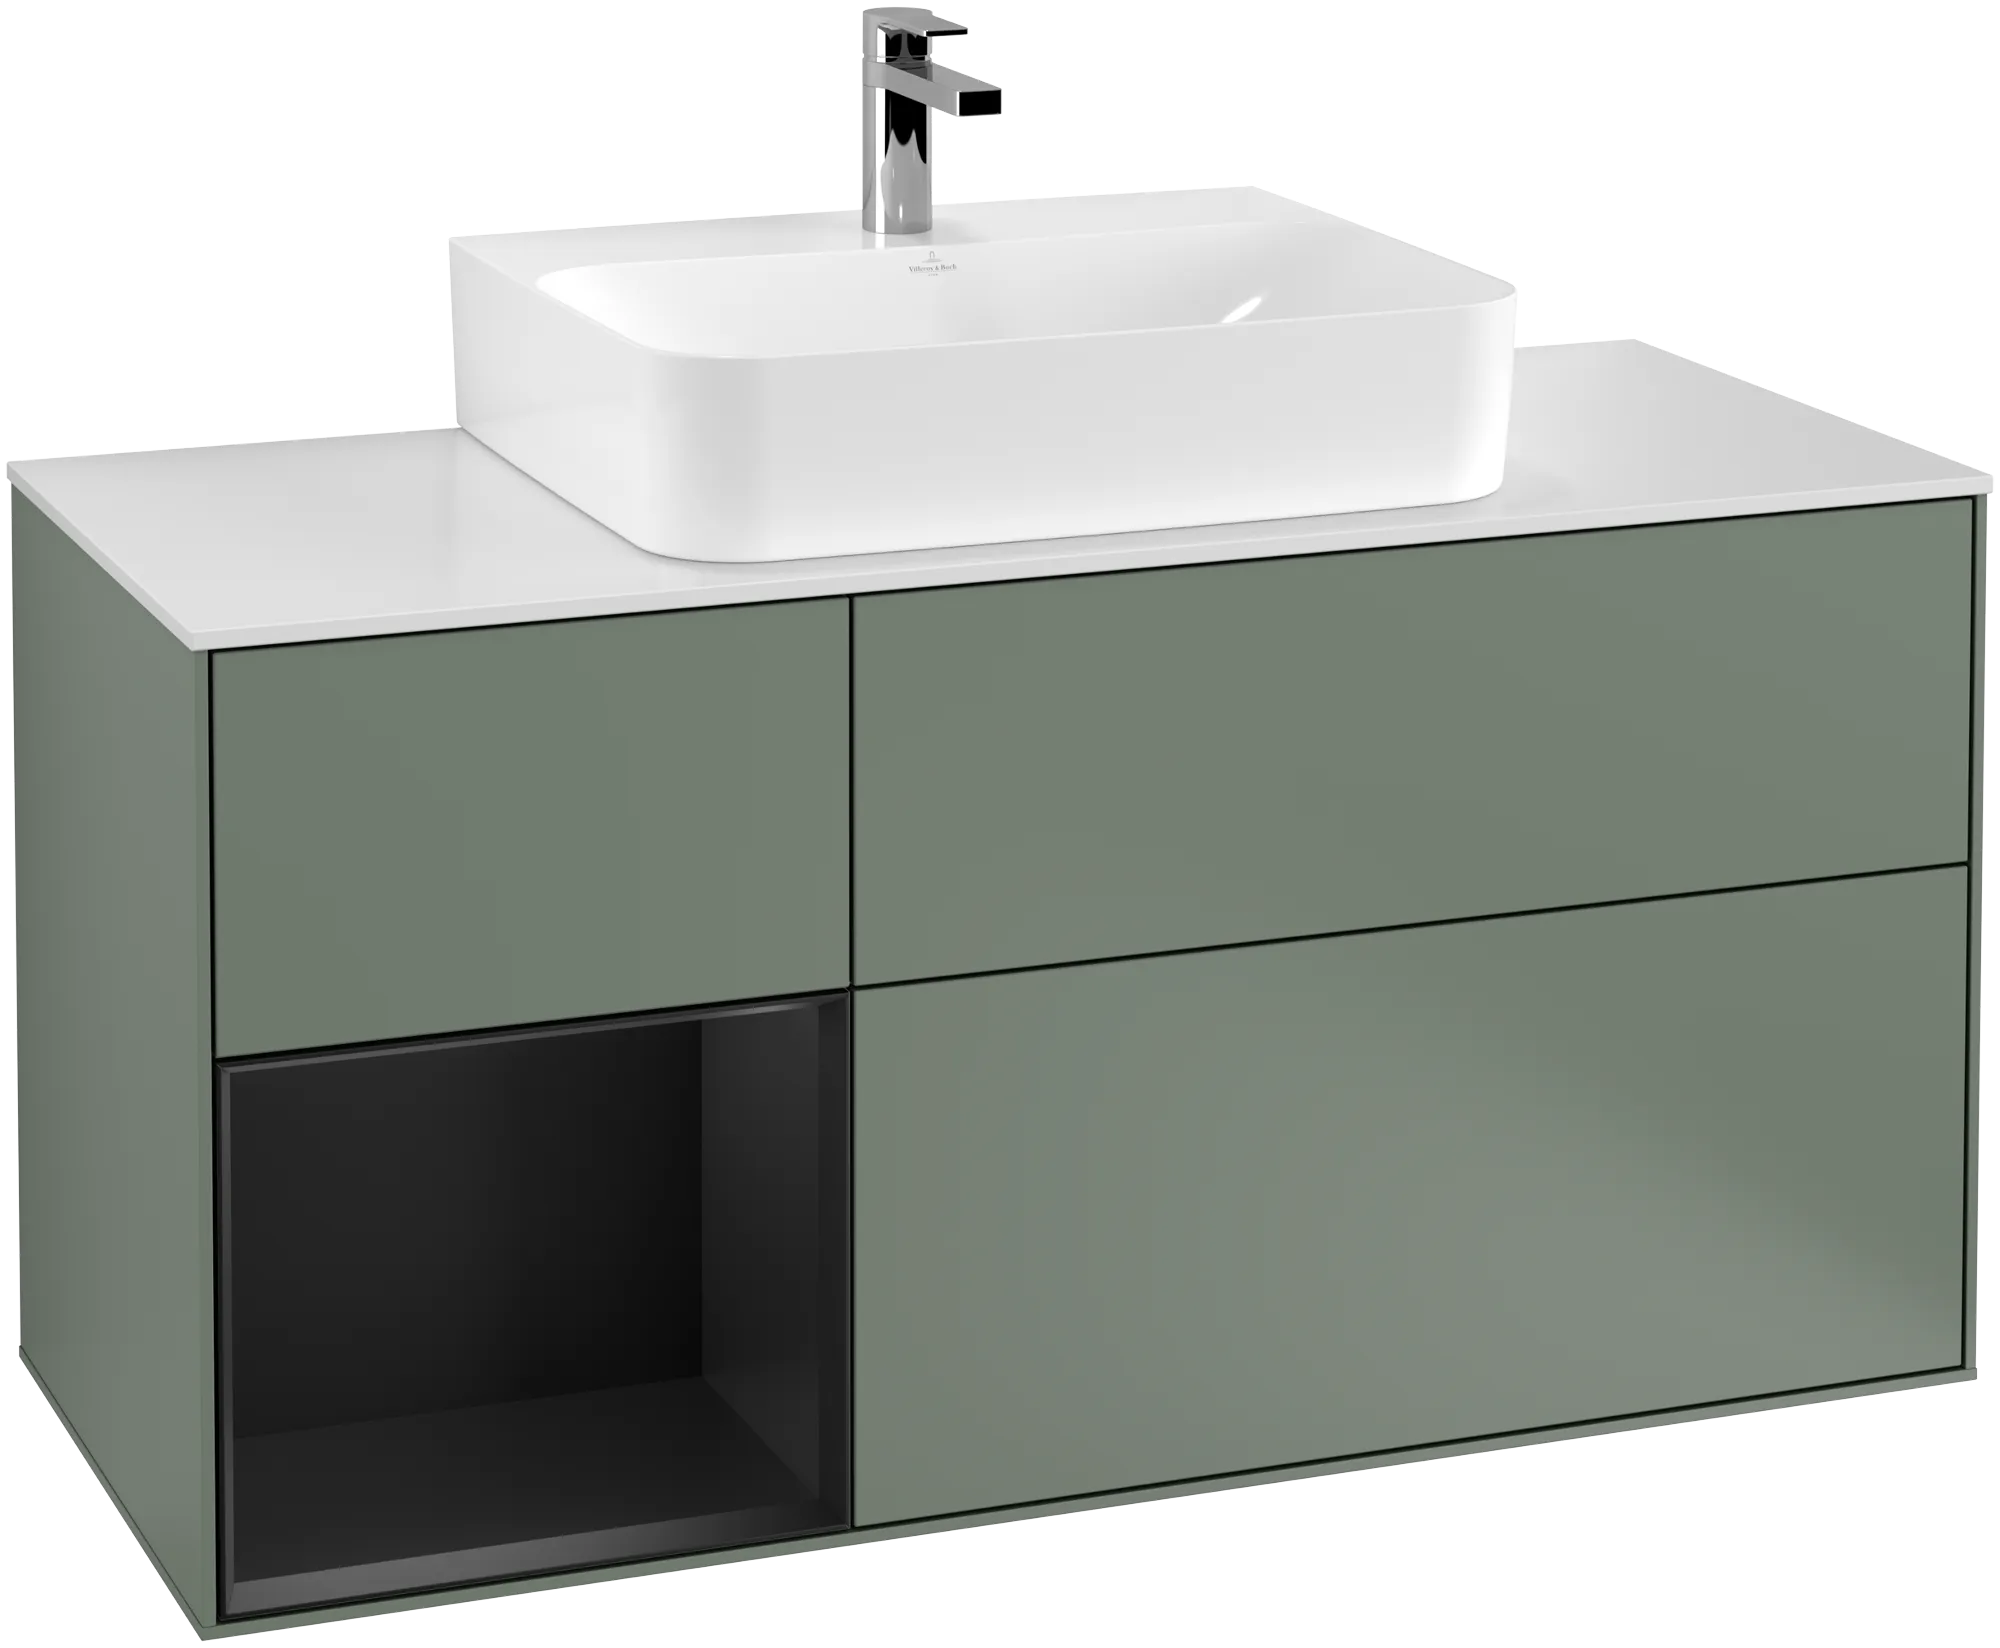 Picture of VILLEROY BOCH Finion Vanity unit, with lighting, 3 pull-out compartments, 1200 x 603 x 501 mm, Olive Matt Lacquer / Black Matt Lacquer / Glass White Matt #G161PDGM